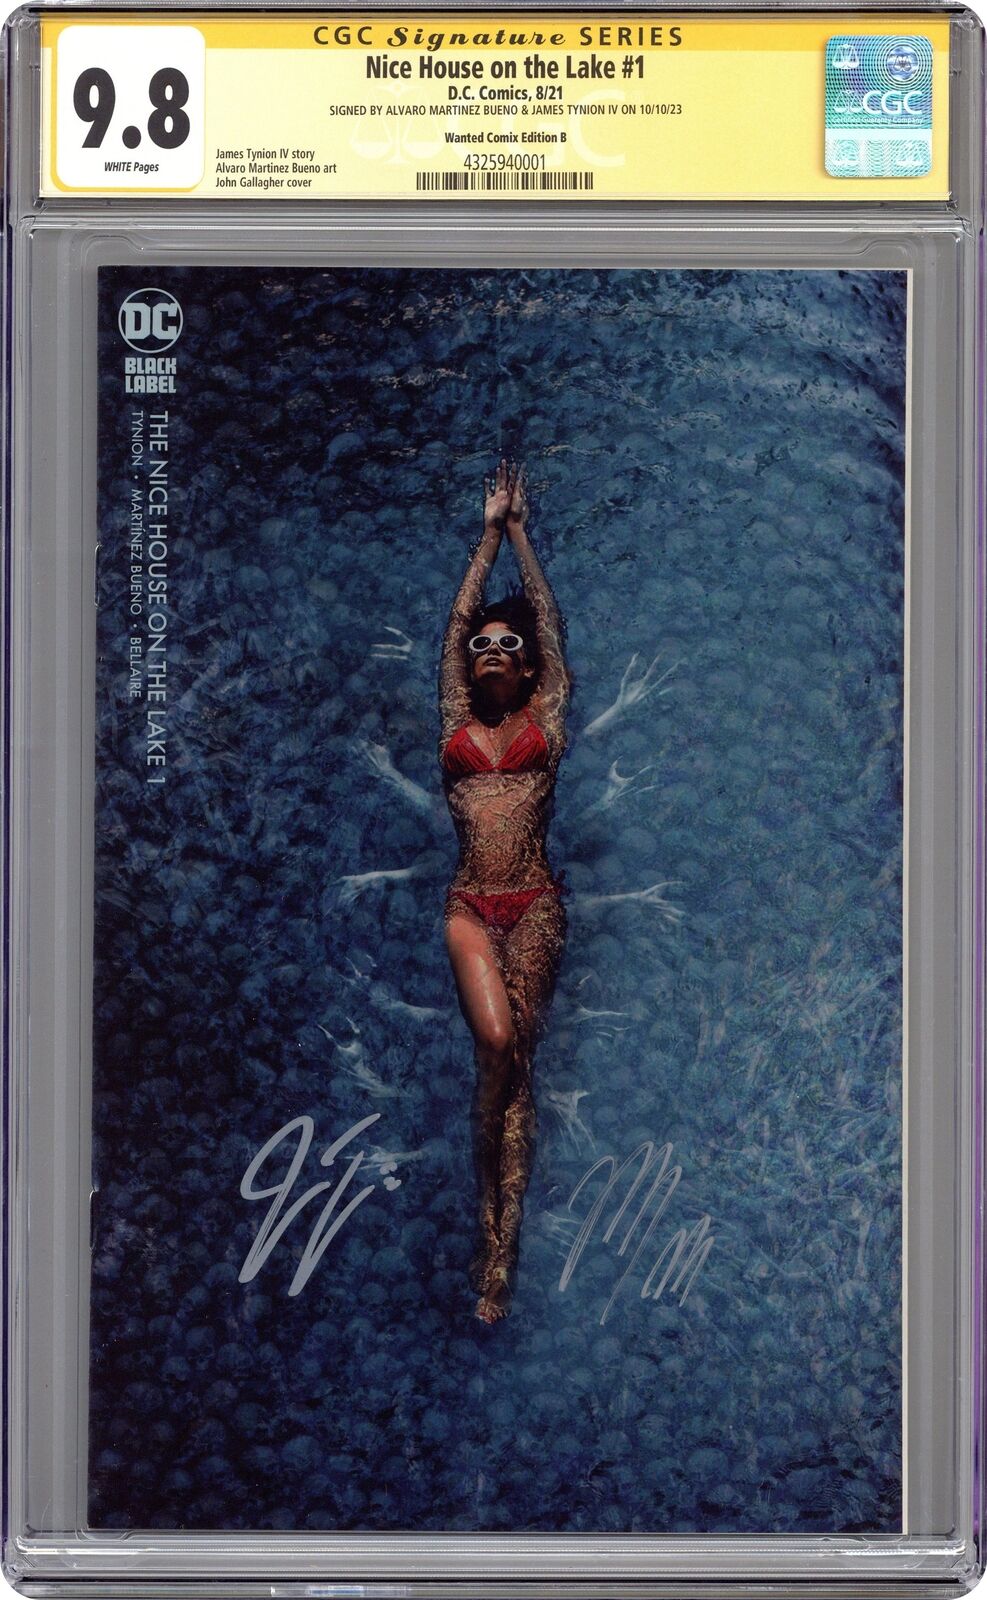 Nice House on the Lake #1 Gallagher Wanted Minimal CGC 9.8 SS 2021